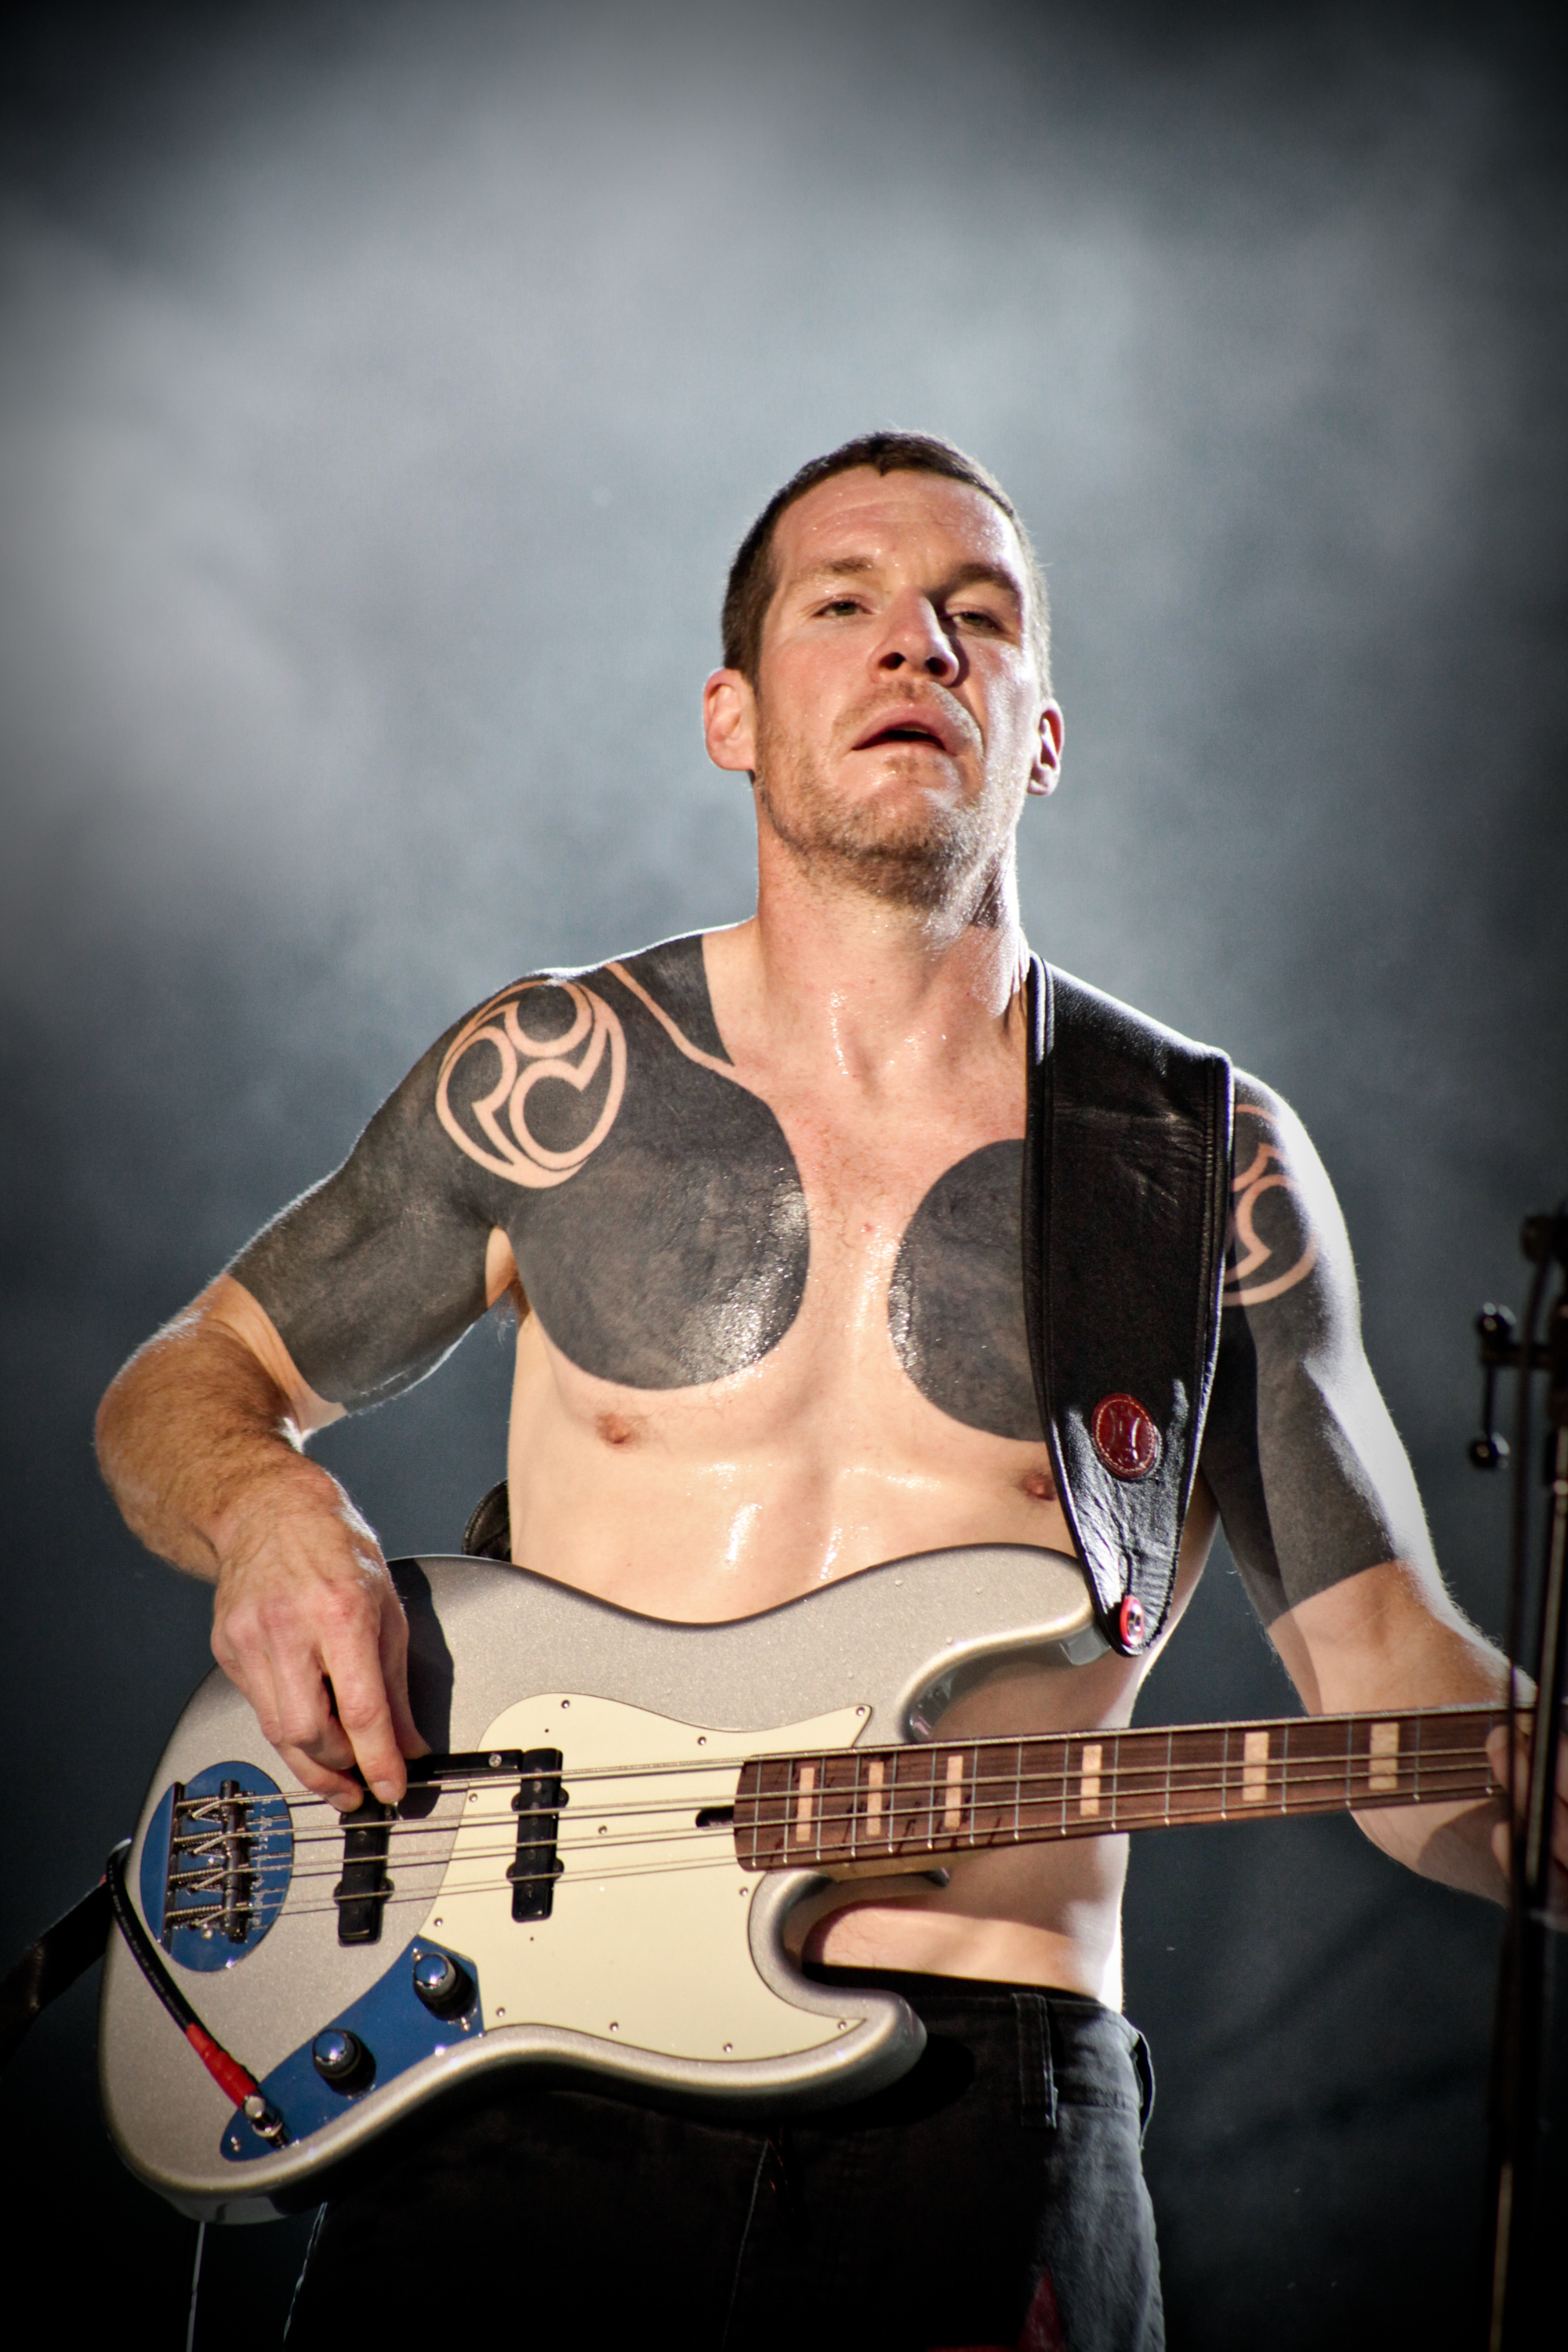 Tim Commerford of Rage Against The Machine performs on stage in Finsbury Park on June 6, 2010 in London, UK. (Christie Goodwin&mdash;Redferns / Getty Images)